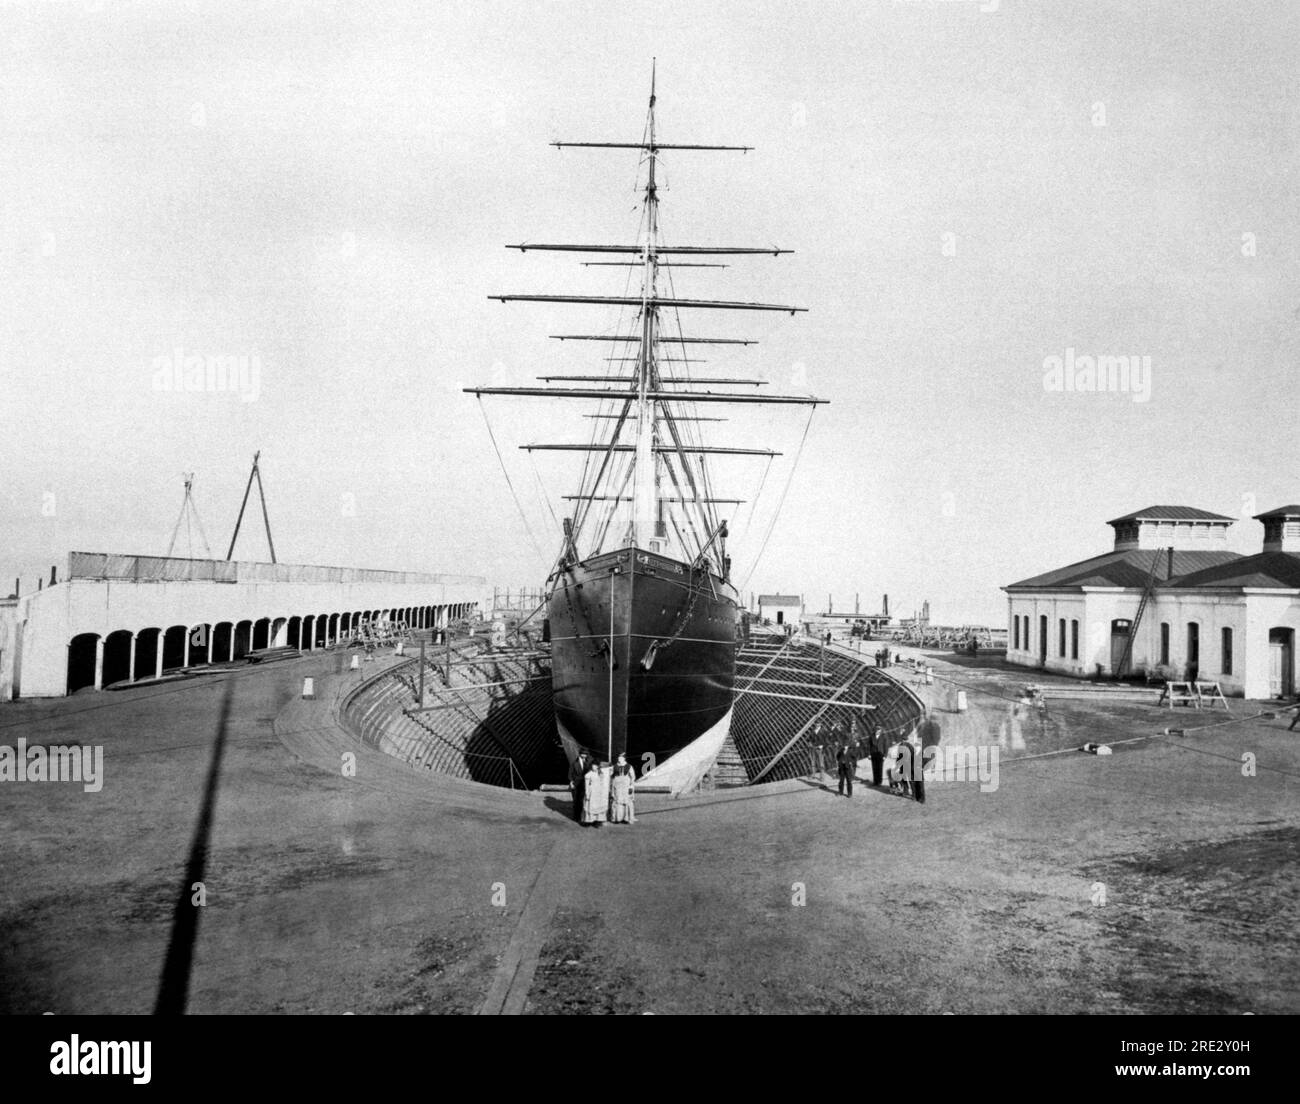 San Francisco, California:  1874 The Pacific Mail Steamship Company's largest iron steamer, the City of Peking, at the Hunters Point drydock. Stock Photo